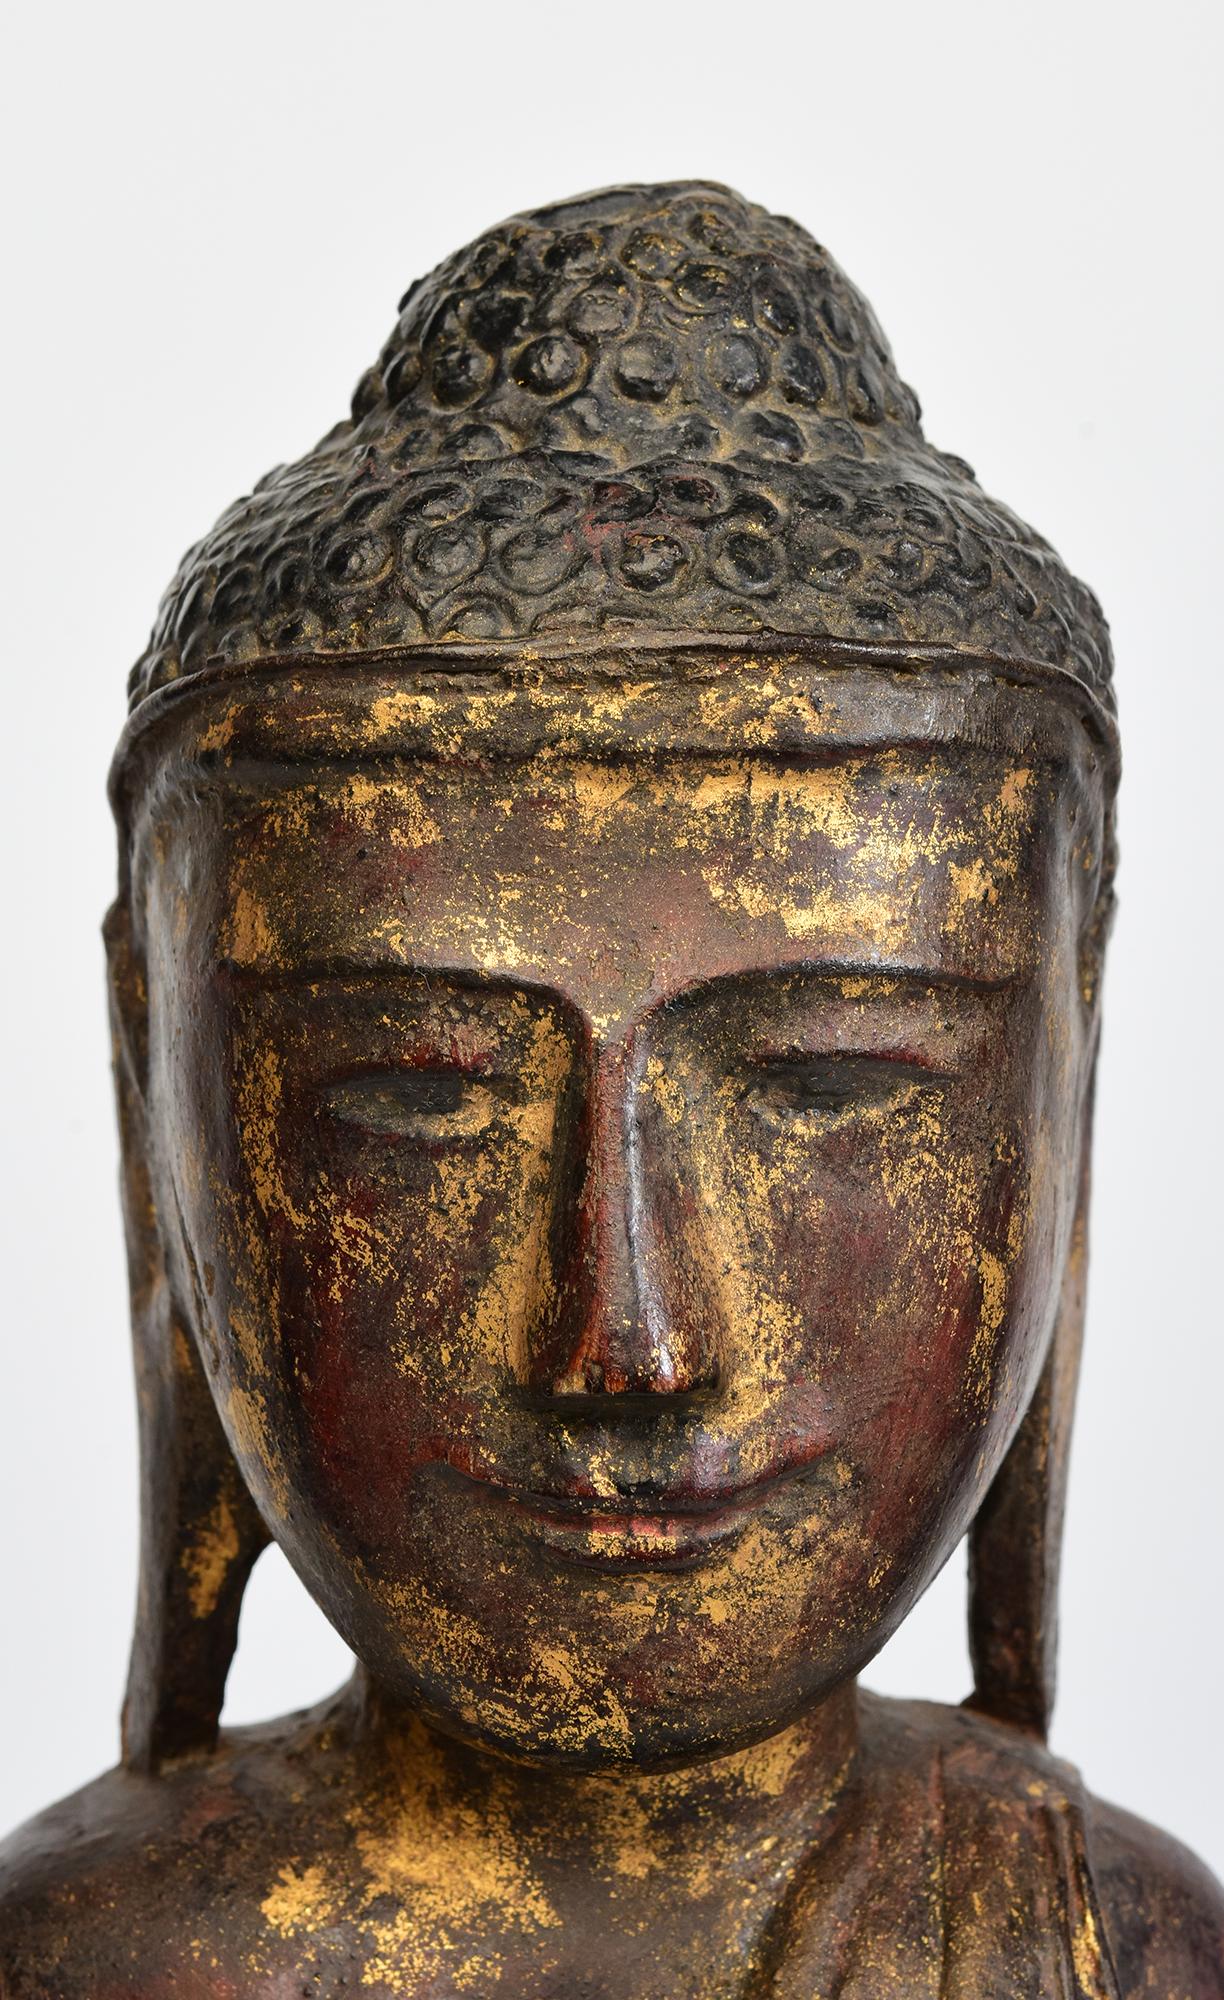 Antique Burmese wooden Buddha sitting in Mara Vijaya (calling the earth to witness) posture on a base.

Age: Burma, Shan Period, 18th Century
Size: Height 44.8 C.M. / Width 16.9 C.M. / Depth 10 C.M.
Condition: Nice condition overall (some expected